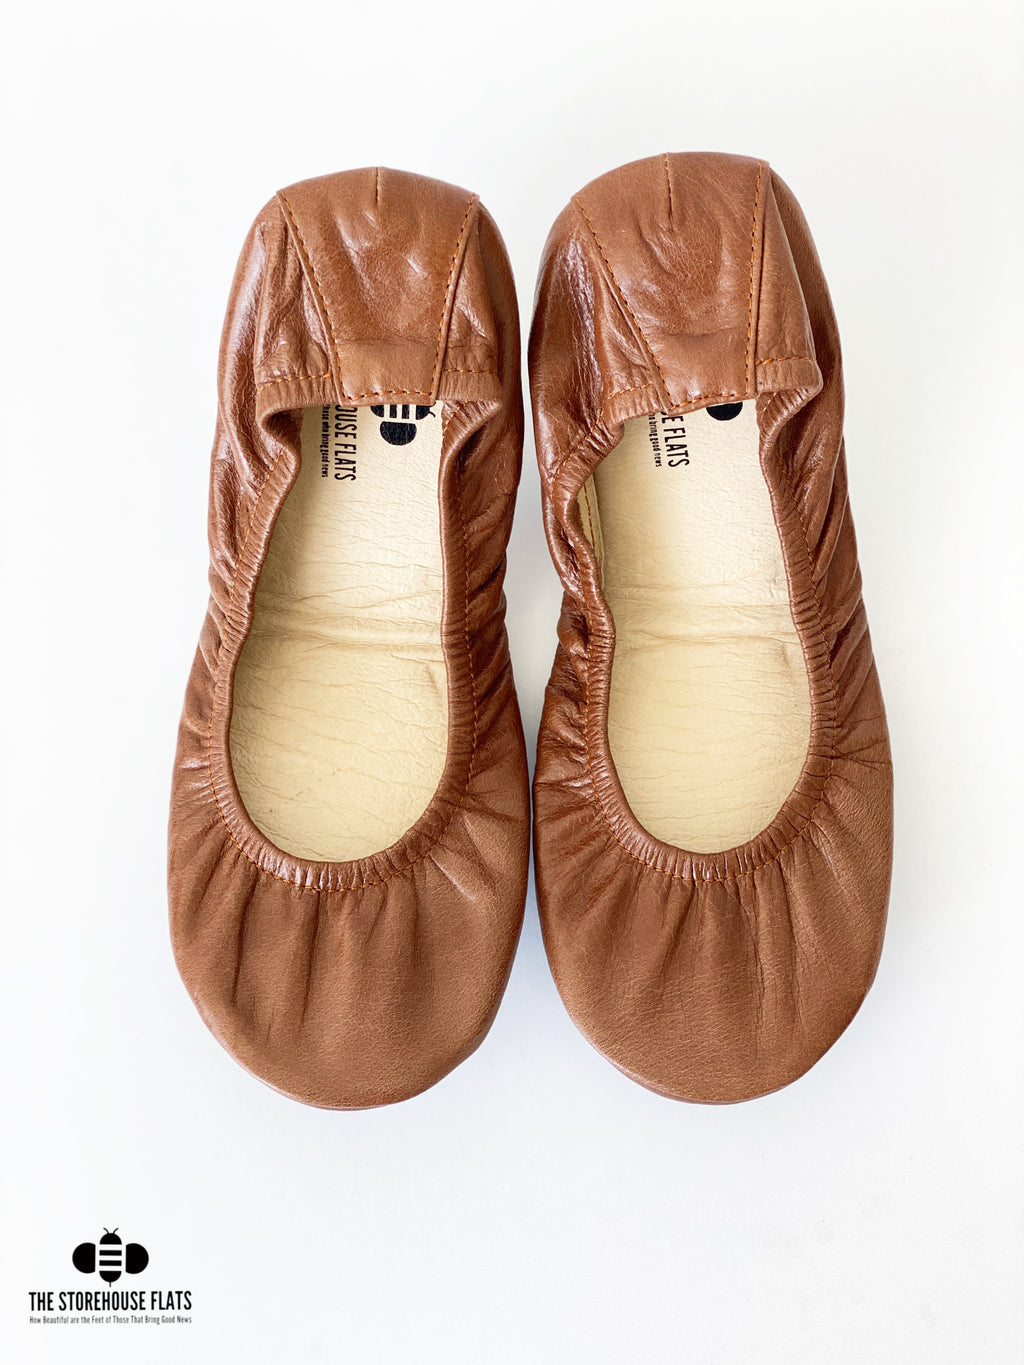 SADDLE BROWN OIL TANNED | IN STOCK - The Storehouse Flats